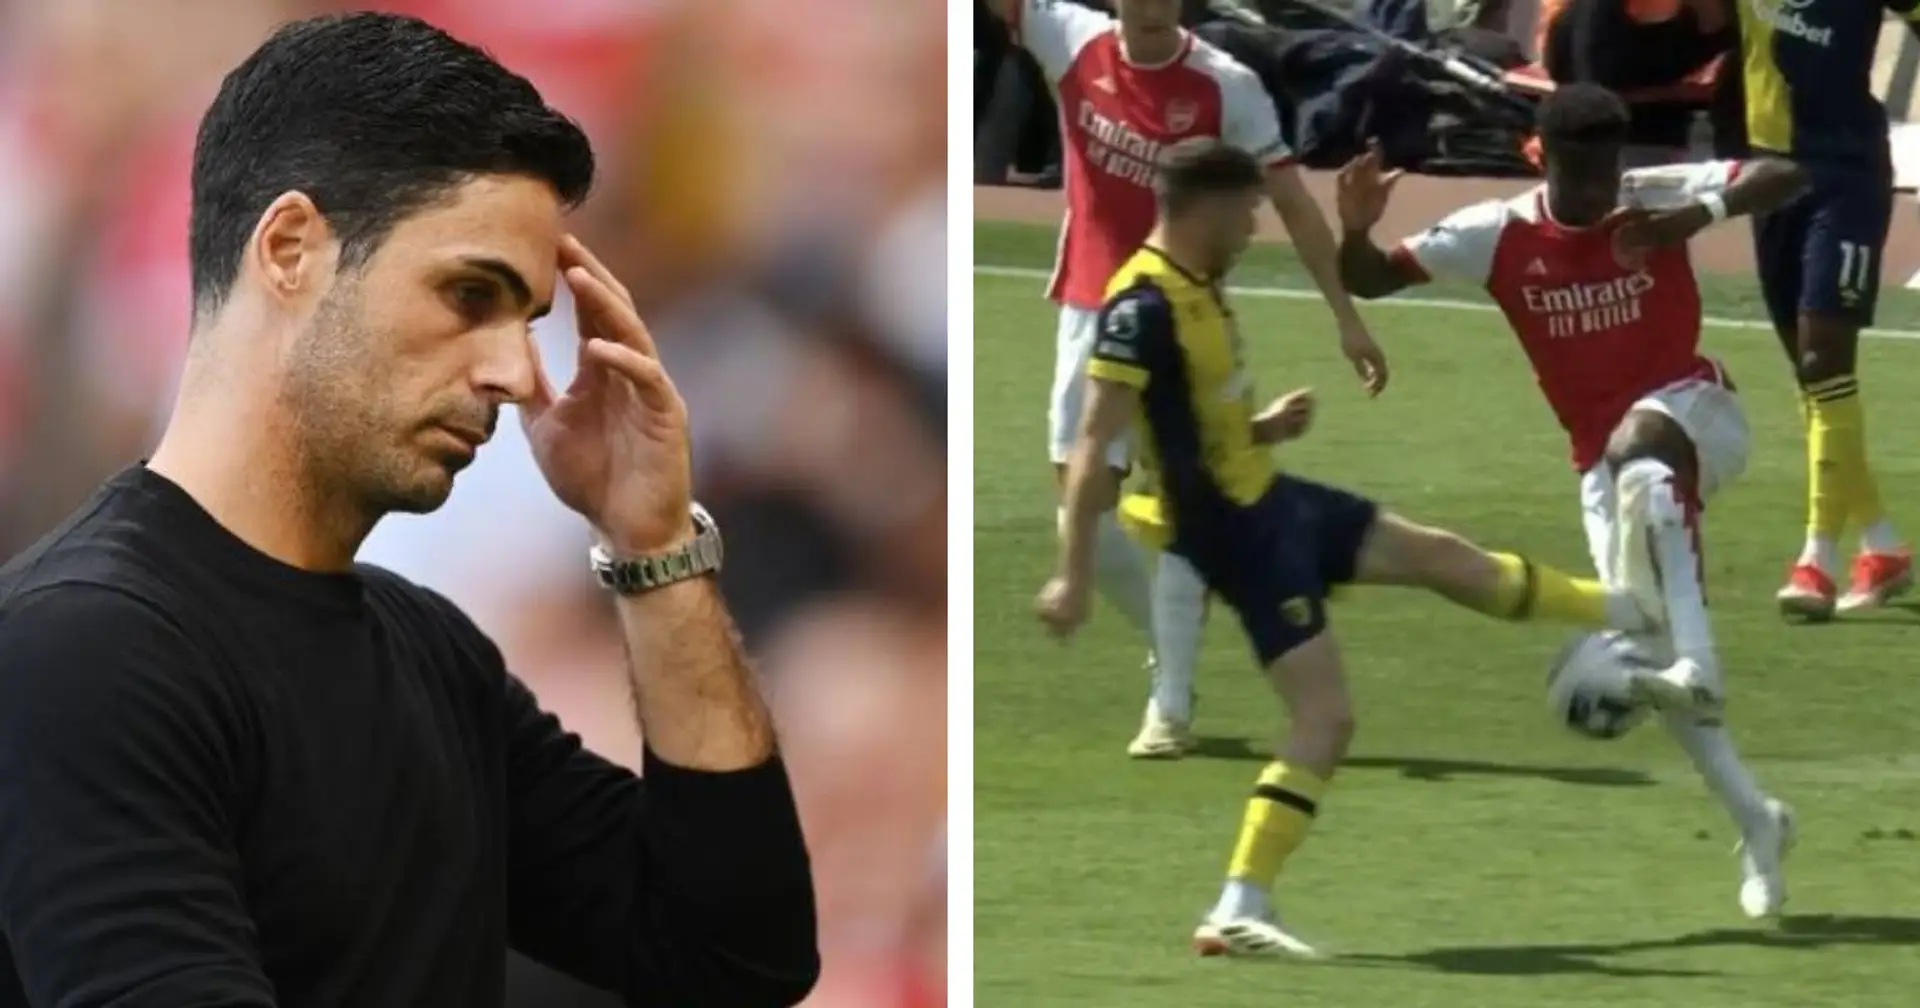 'Same guy wiped out Havertz now': Arsenal fans rage as referee turns blind eye TWICE vs Bournemouth